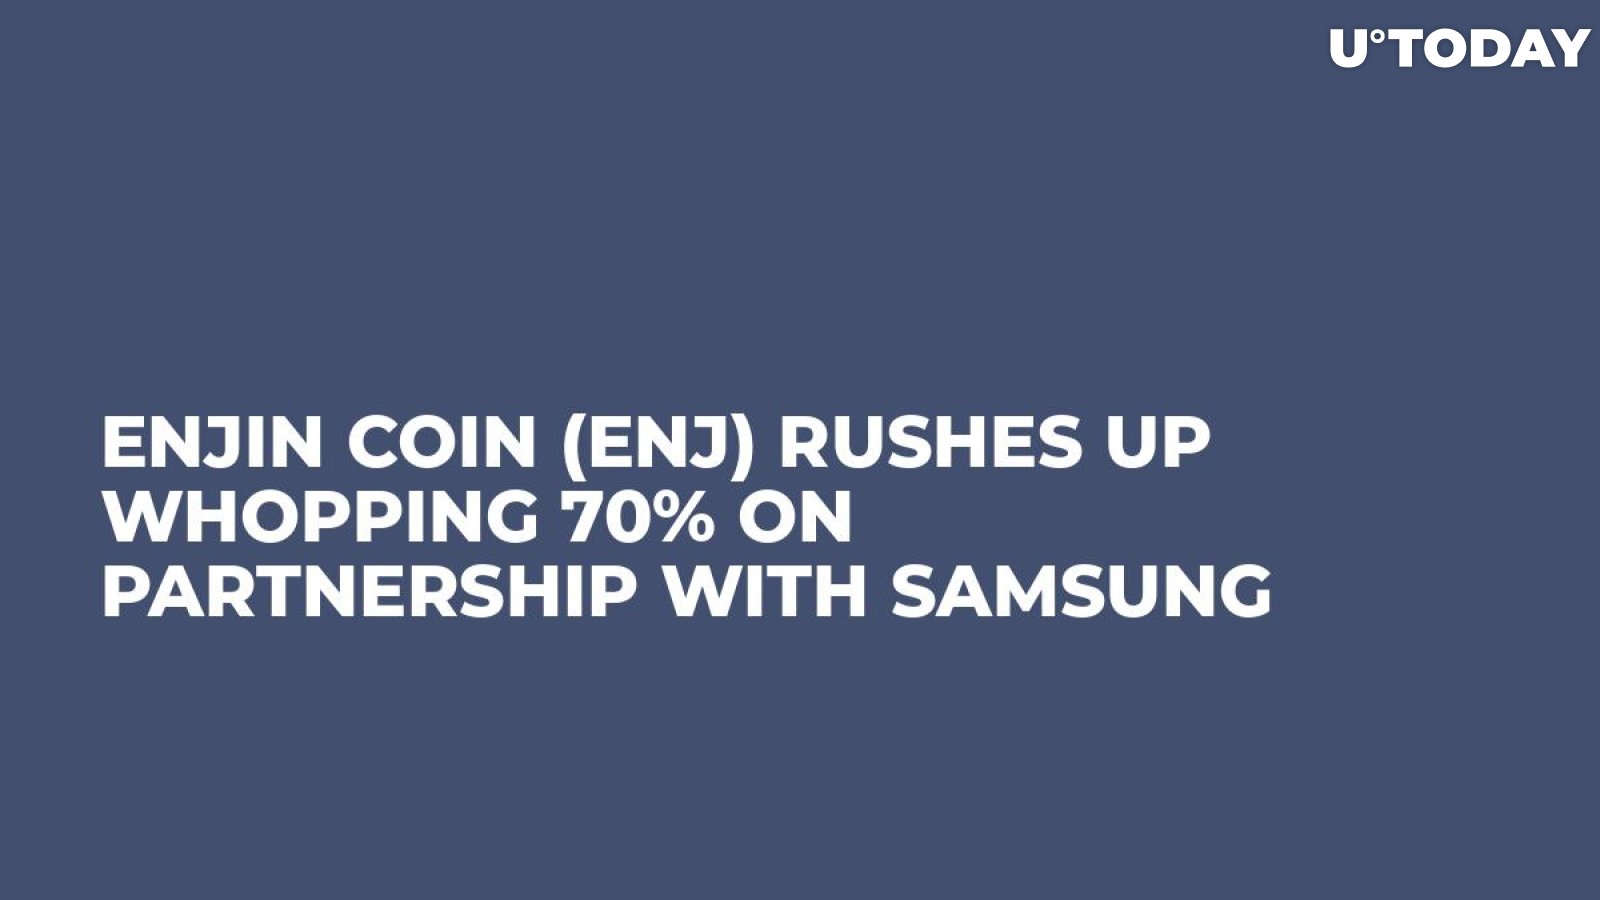 Enjin Coin (ENJ) Rushes up Whopping 70% on Partnership with Samsung